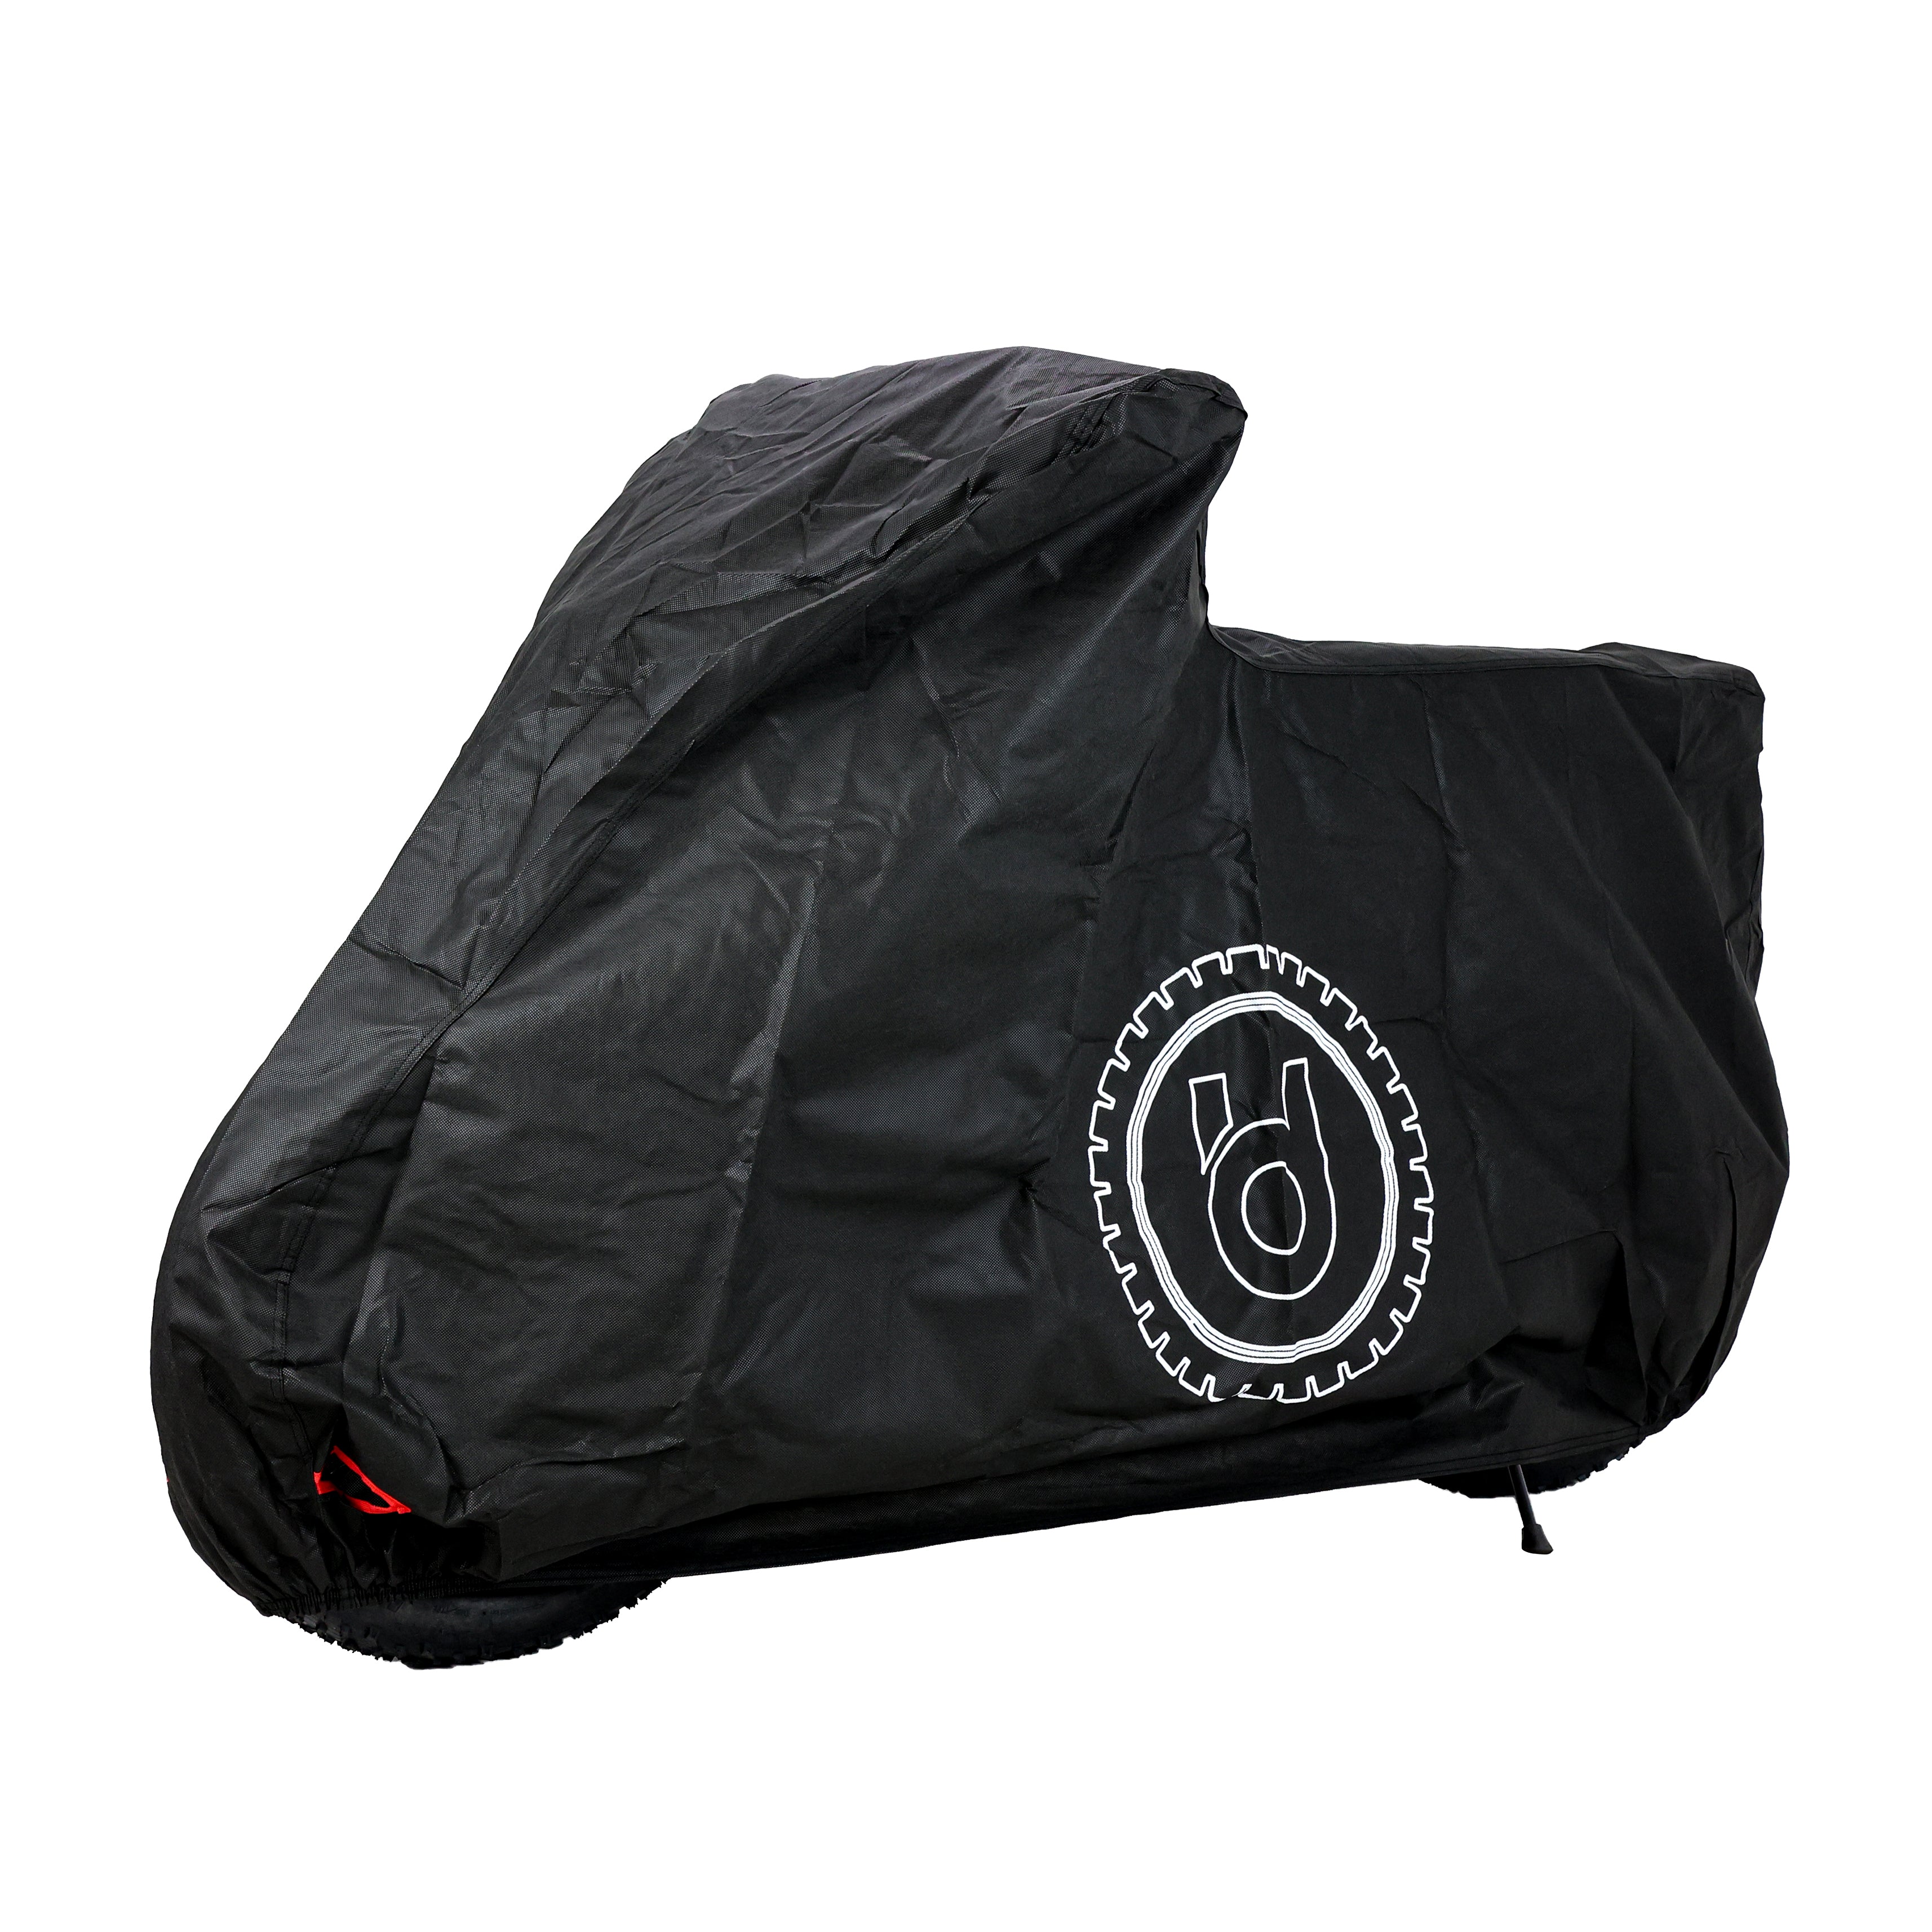 Bike Cover（バイクカバー） – Urban Drivestyle